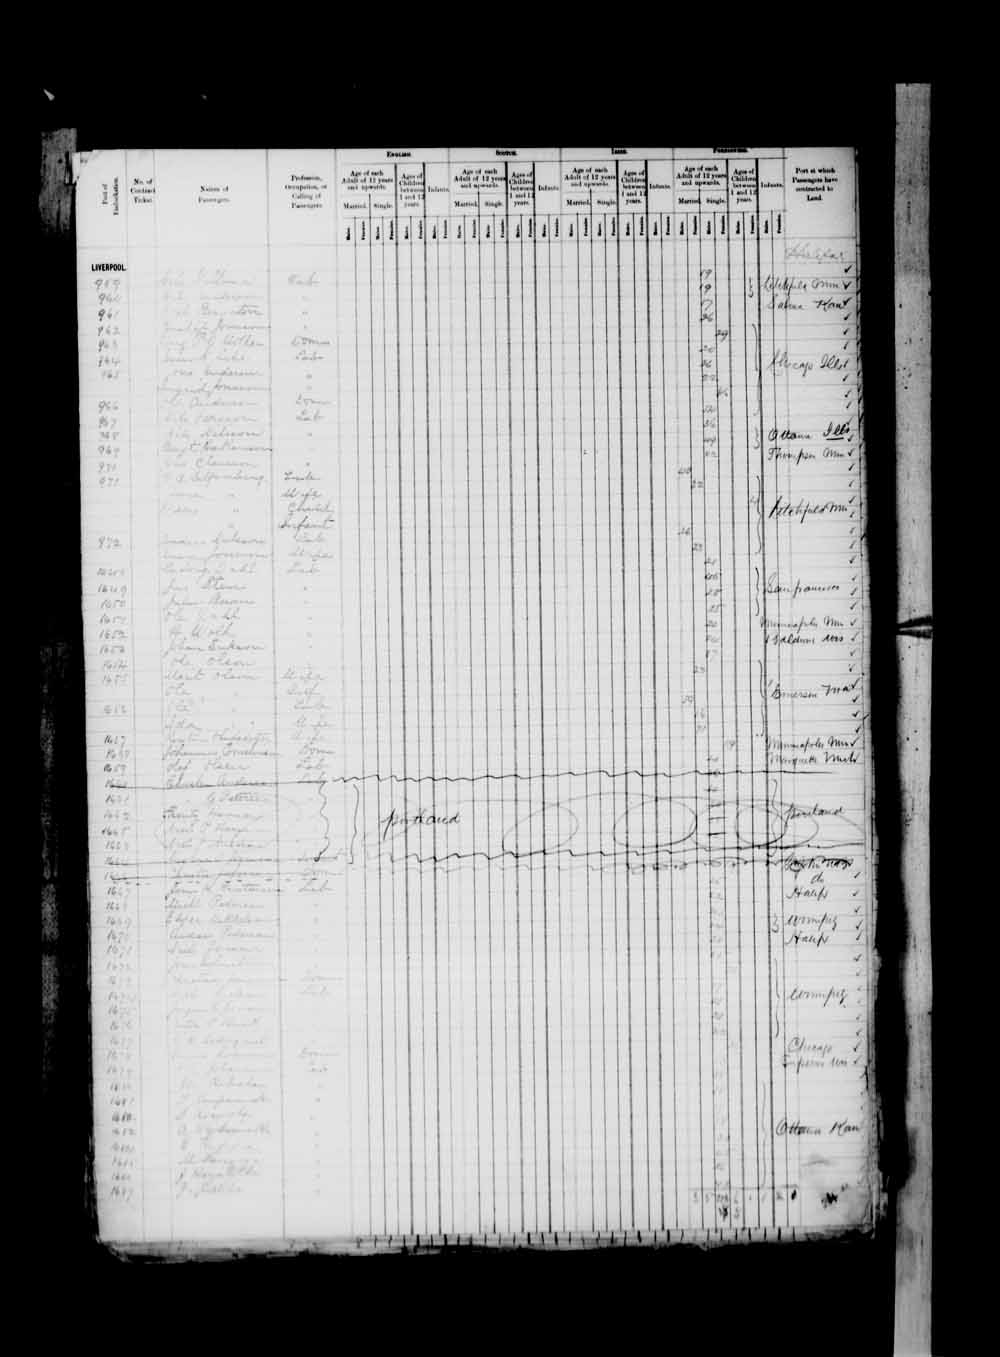 Digitized page of Passenger Lists for Image No.: e003674941